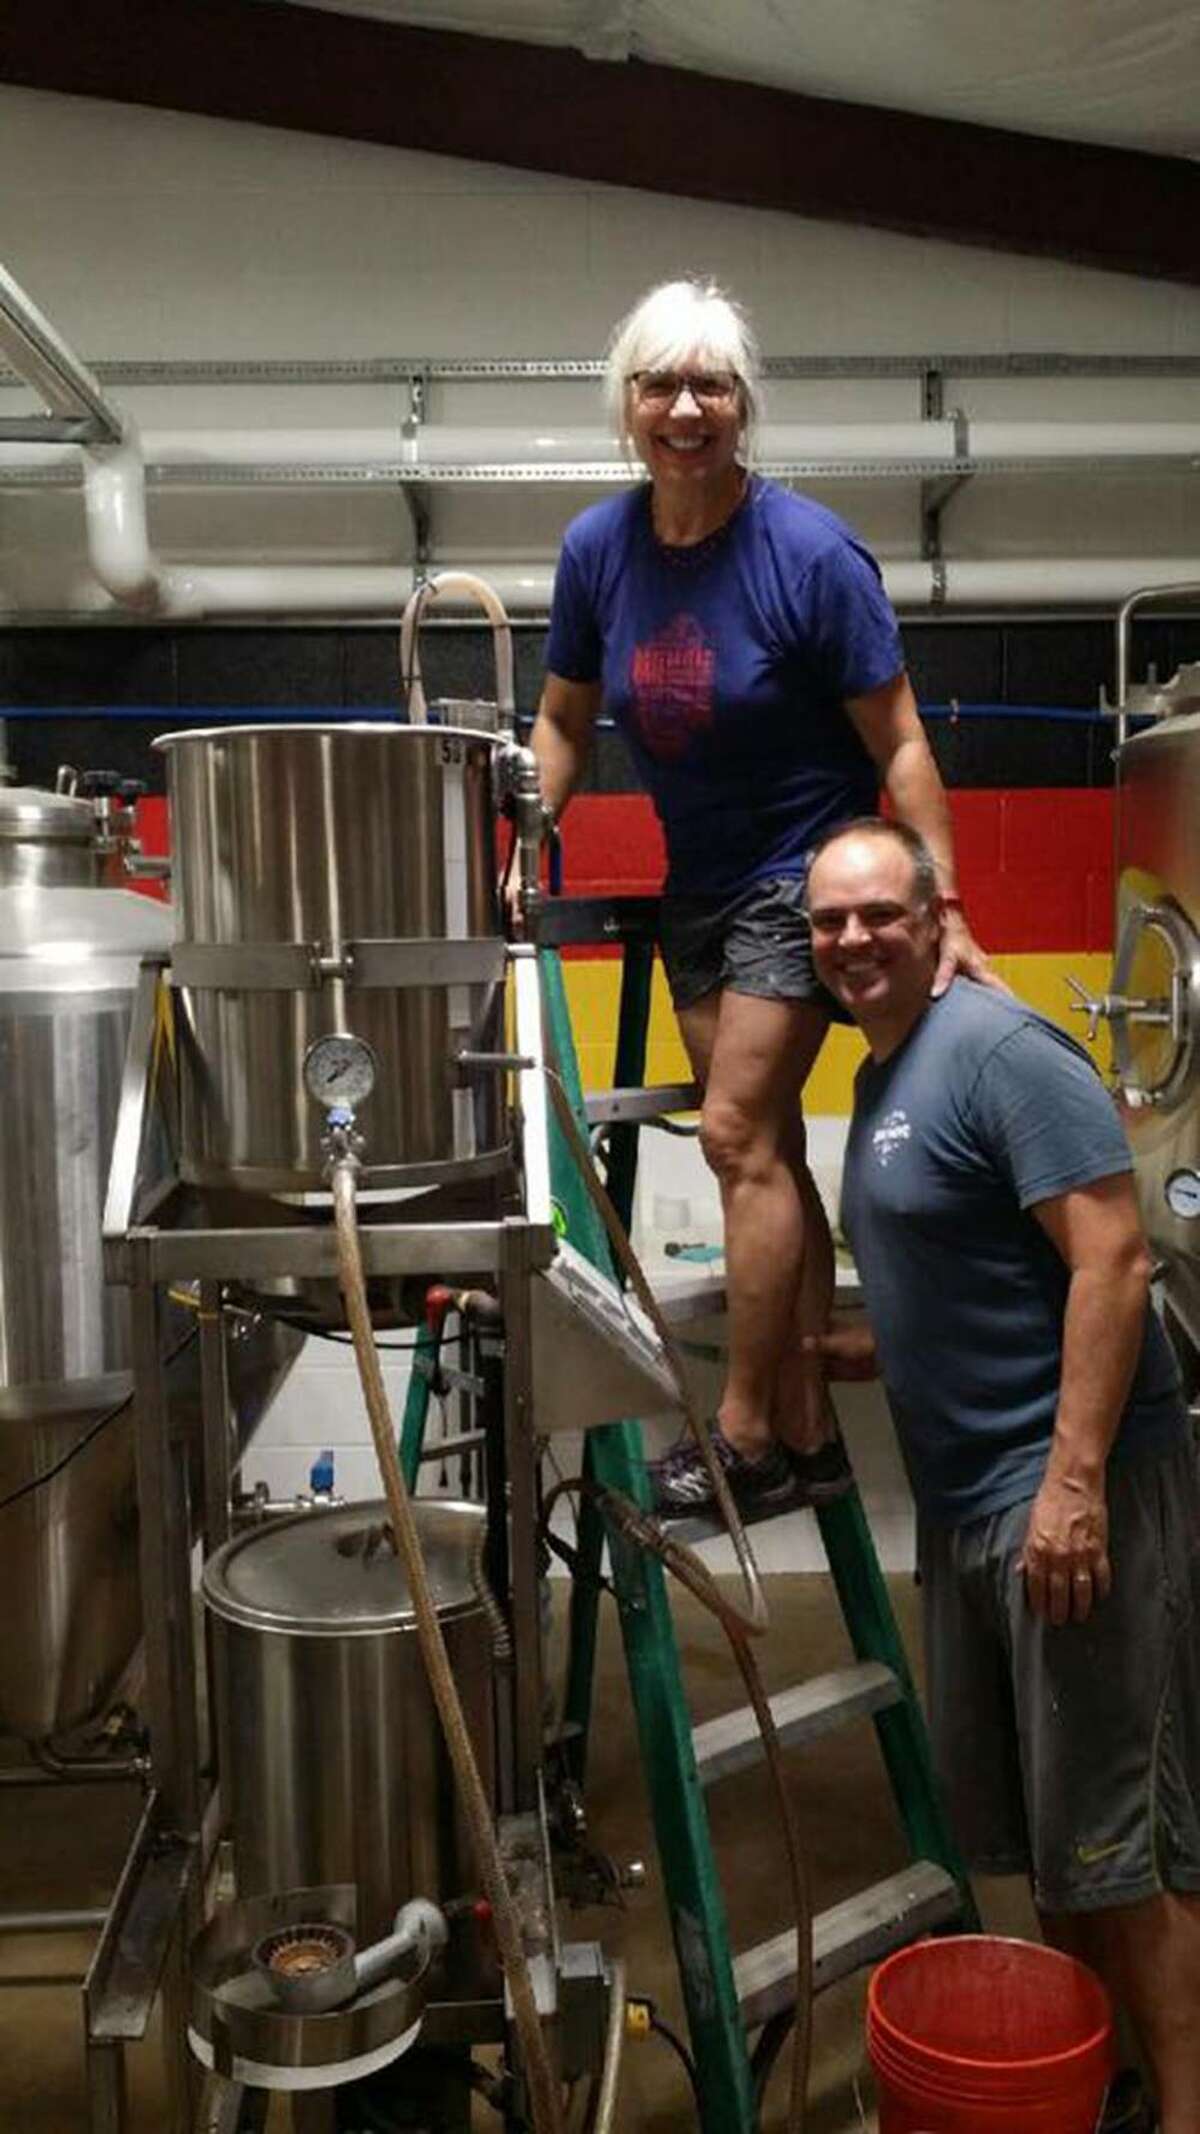 Head brewer Vera Deckard and her husband Brent Deckard own and operate Künstler Brewing at 302 East Lachapelle in the Lone Star Brewery District. Vera’s “Chamuco” beer, made with three chile varieties, chocolate, vanilla and cinnamon, won a silver medal in the chile beer category.